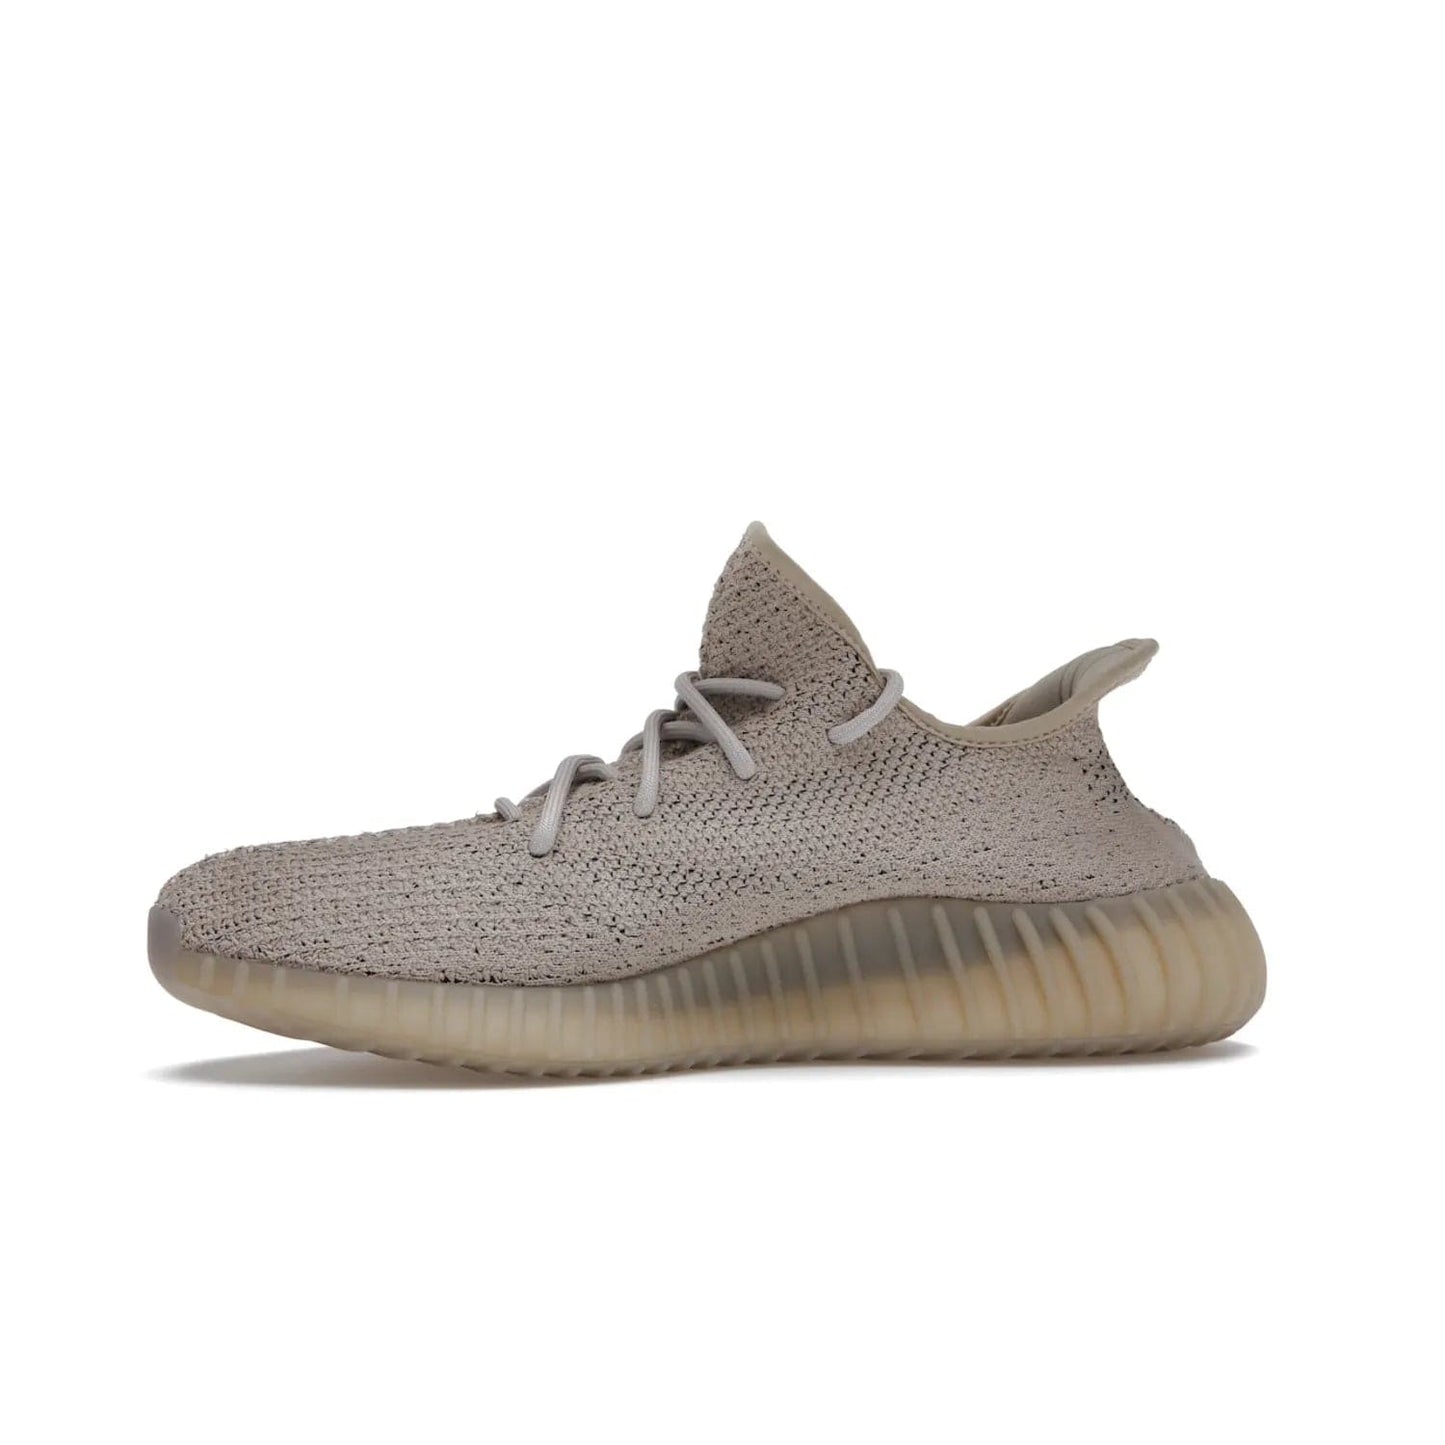 adidas Yeezy Boost 350 V2 Slate - Image 18 - Only at www.BallersClubKickz.com - Adidas Yeezy Boost 350 V2 Slate Core Black Slate featuring Primeknit upper, Boost midsole and semi-translucent TPU cage. Launched on 3/9/2022, retailed at $230.